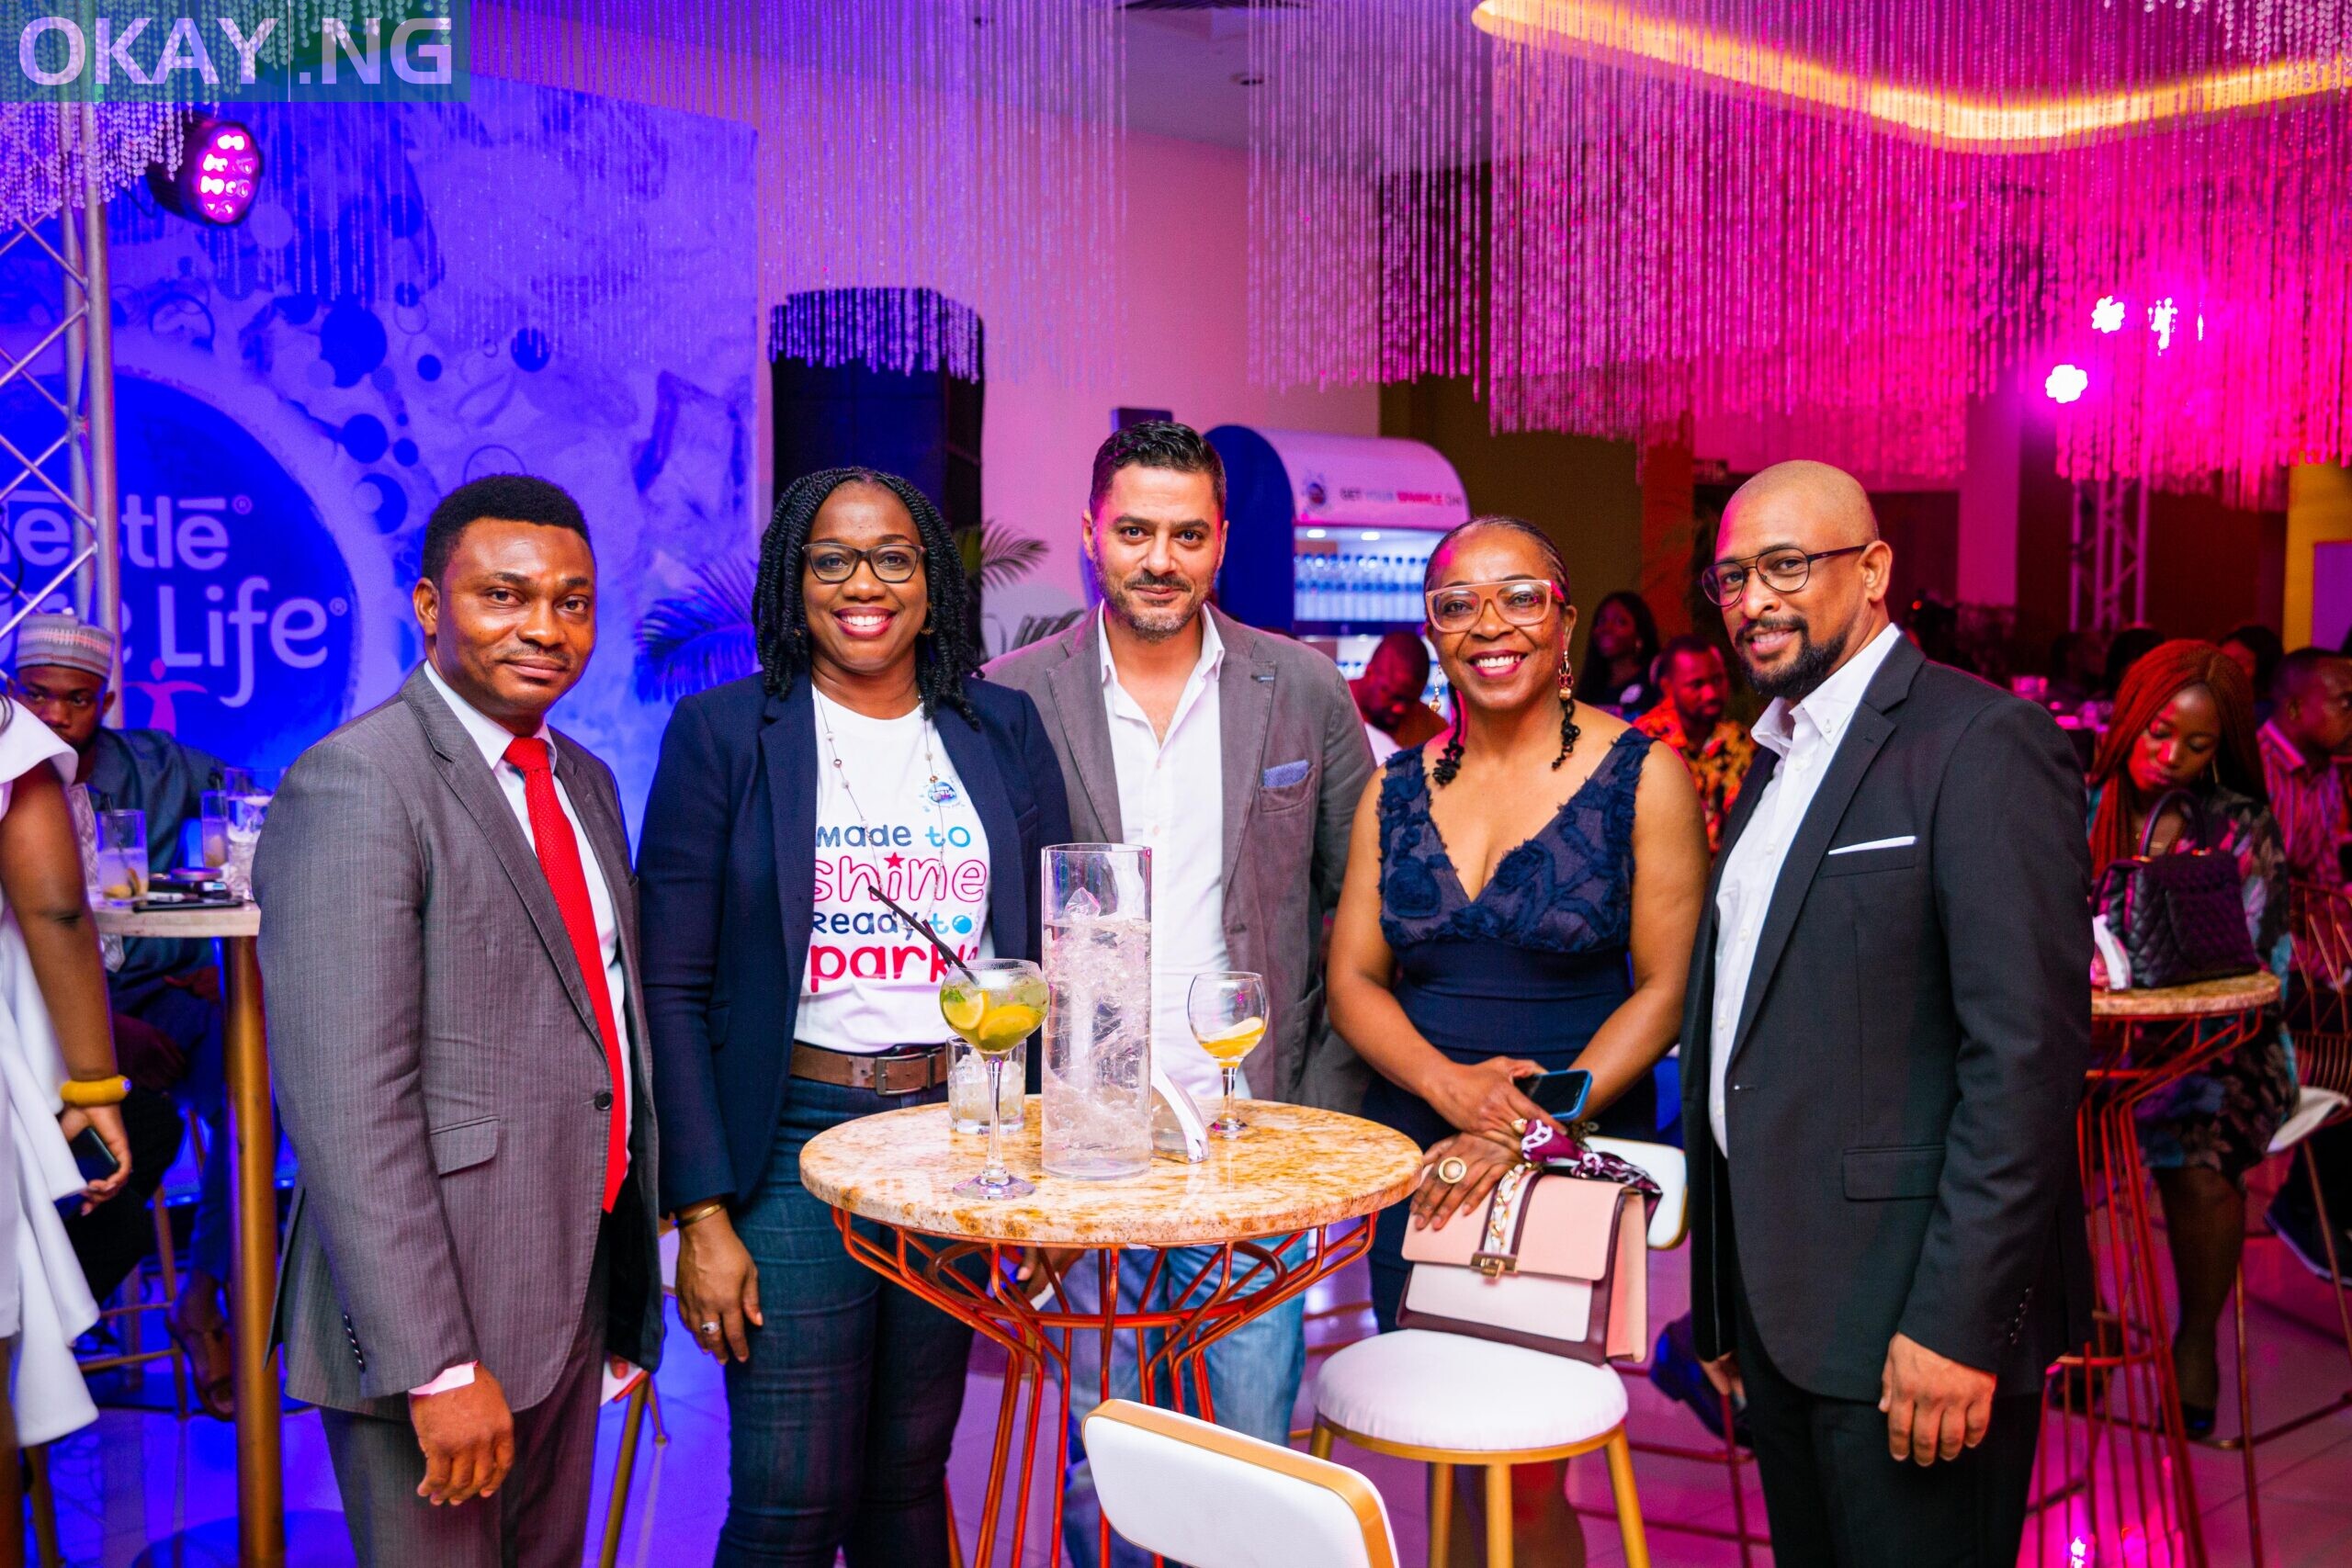 L-R) Churchill Bemigho - Food & Beverages Manager at Lagos Continental, Gloria Nwabuike - Marketing Manager at Nestlé Waters, Chadi Estephan - Co-founder/Head of Marketing and Brand Development at MONIN, Victoria Uwadoka - Corporate Communications and Public Affairs Manager at Nestlé Nigeria PLC and Ludovic Ceffue - Beverage Innovation Manager at MONIN